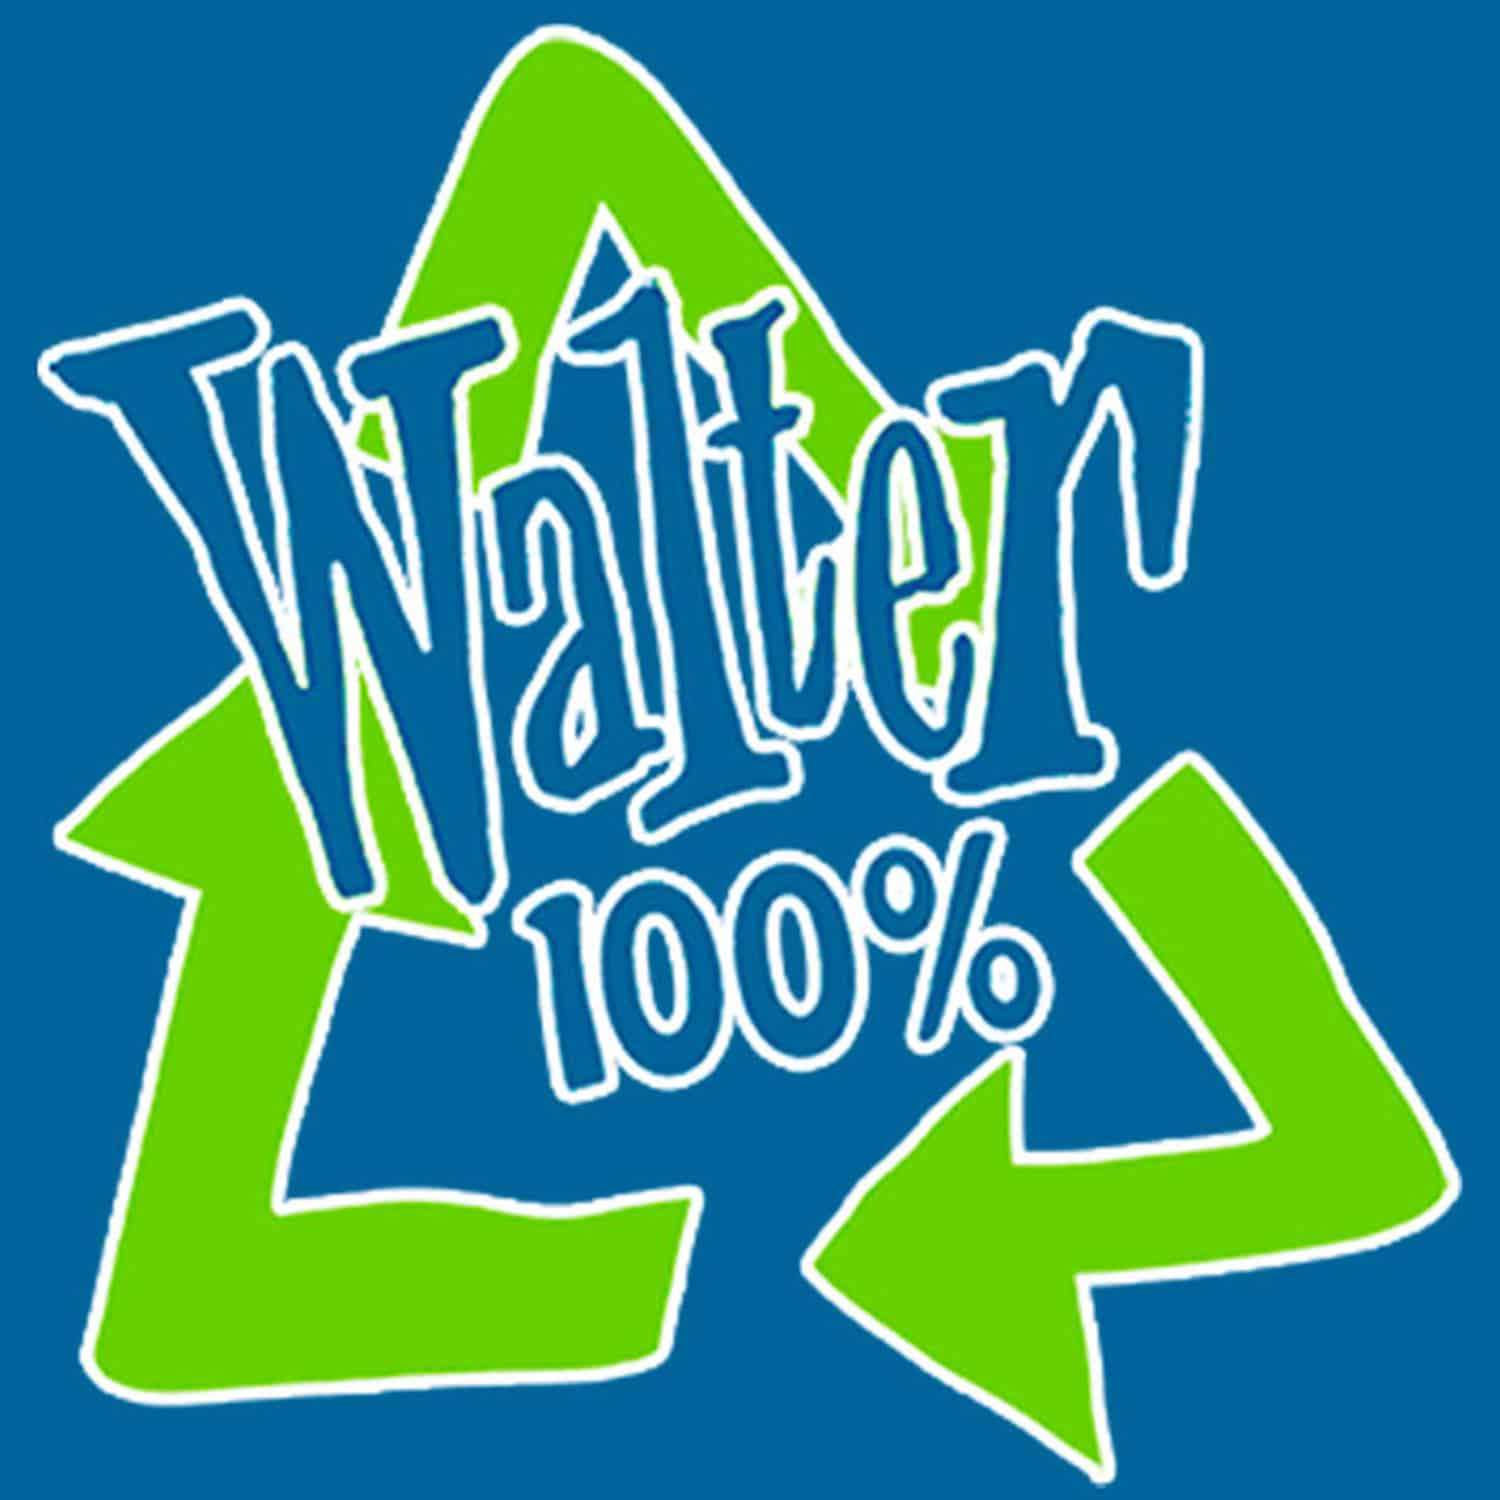 Walter 100% production filmed near the charming town of Sherbrooke, Quebec with the top-of-the-line equipment rented from Films.Solutions, a film production services company in Quebec, Canada.